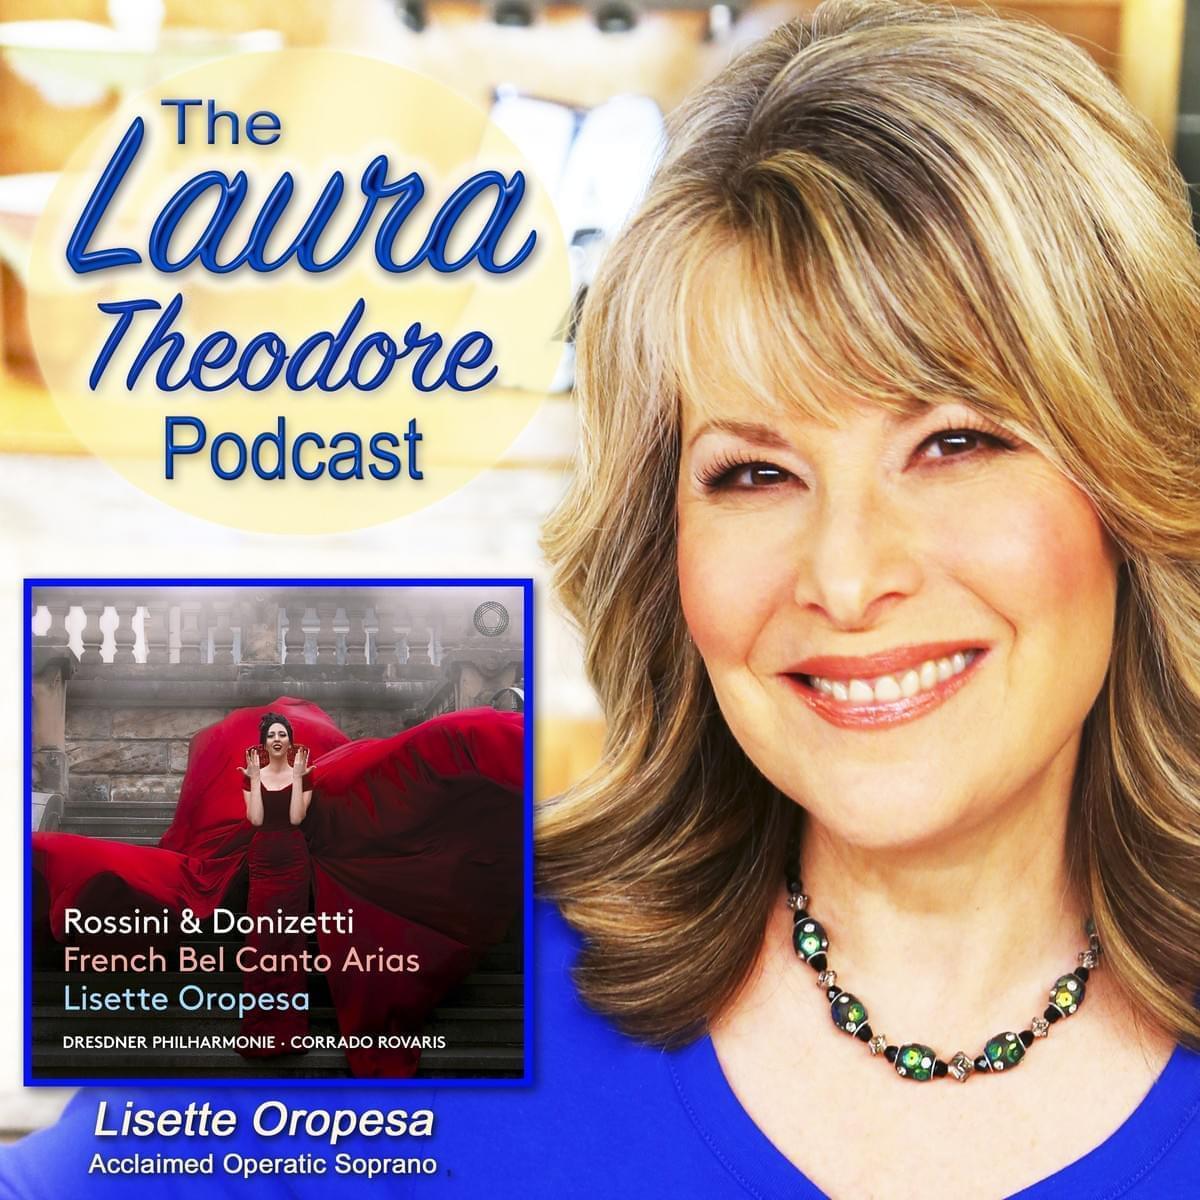 Lisette is interviewed in the Laura Theodore Podcast about Vegertarianisim